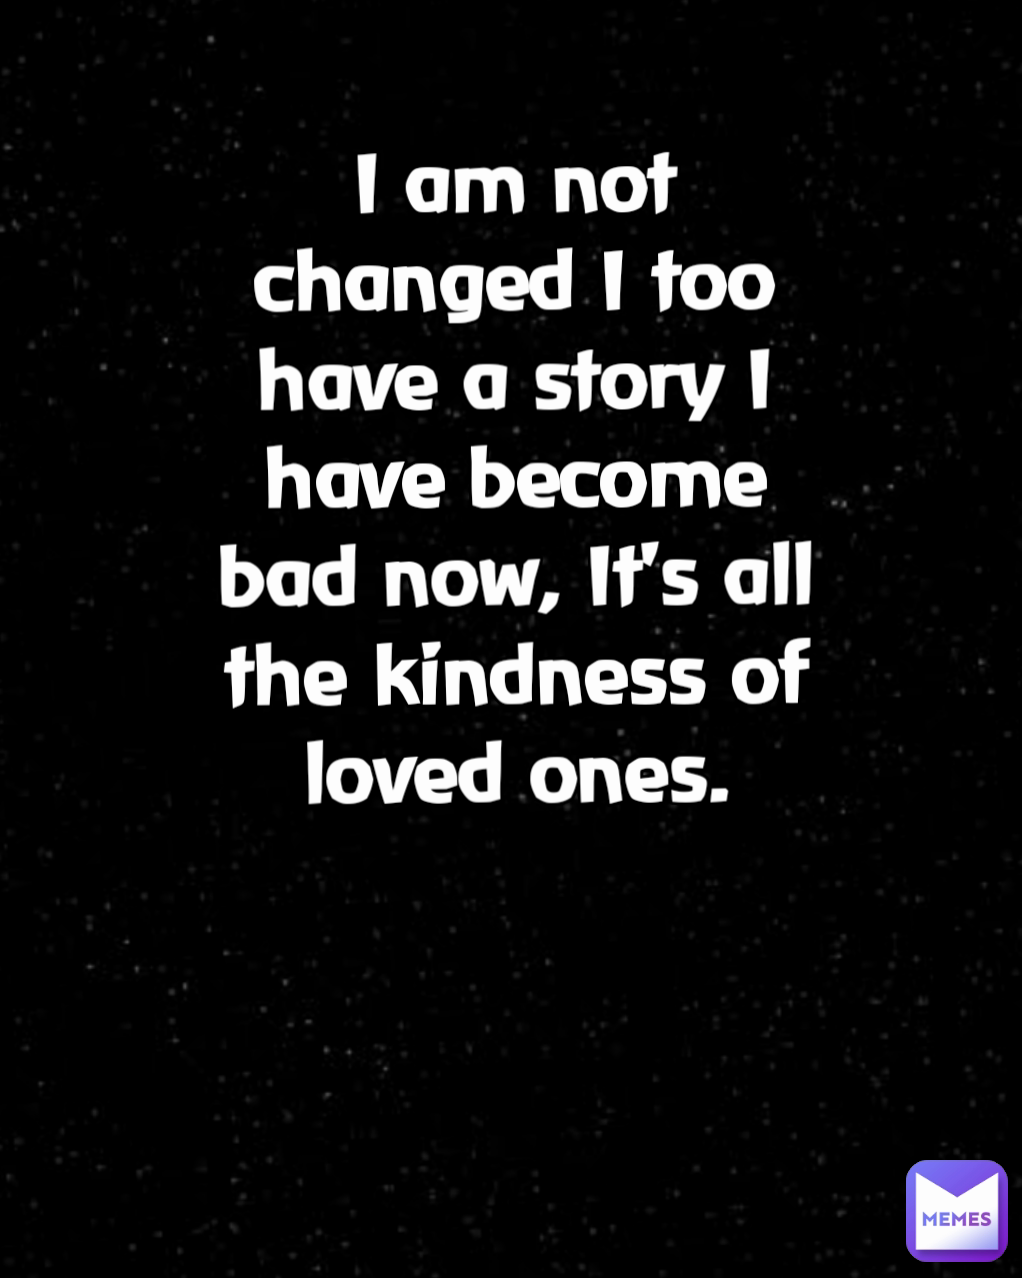 I am not changed I too have a story I have become bad now, It's all the kindness of loved ones.